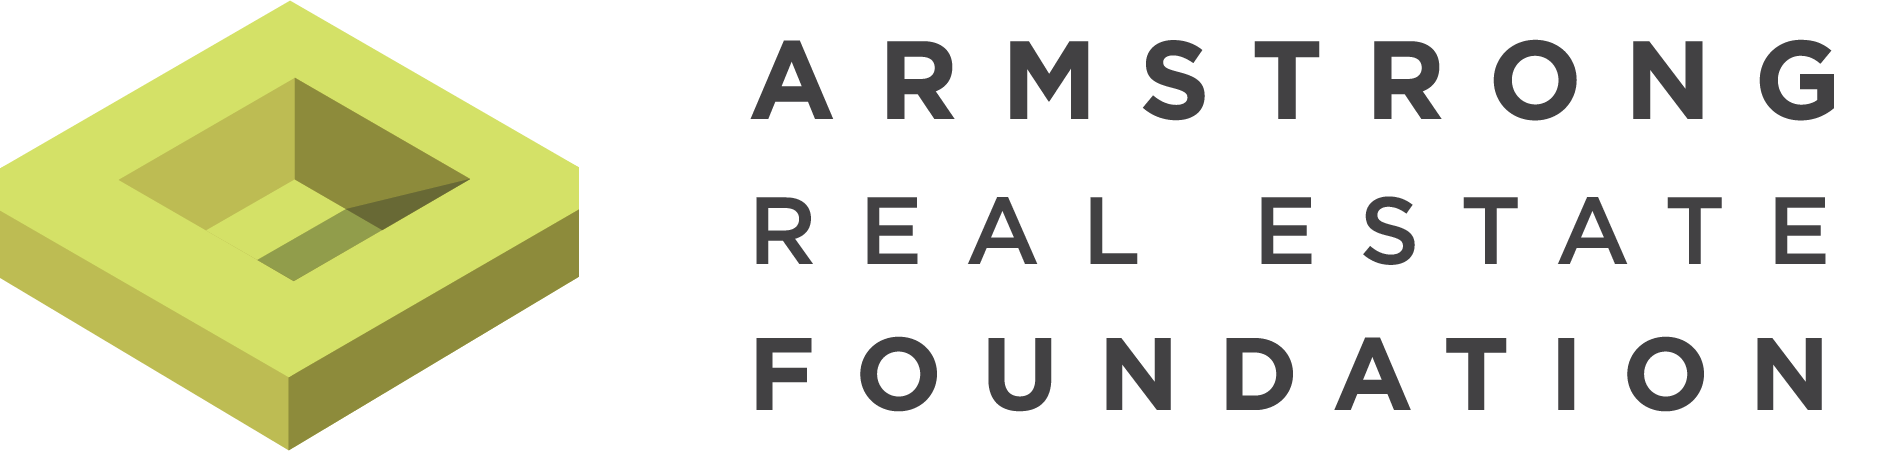 ARE_FoundationLogo.png